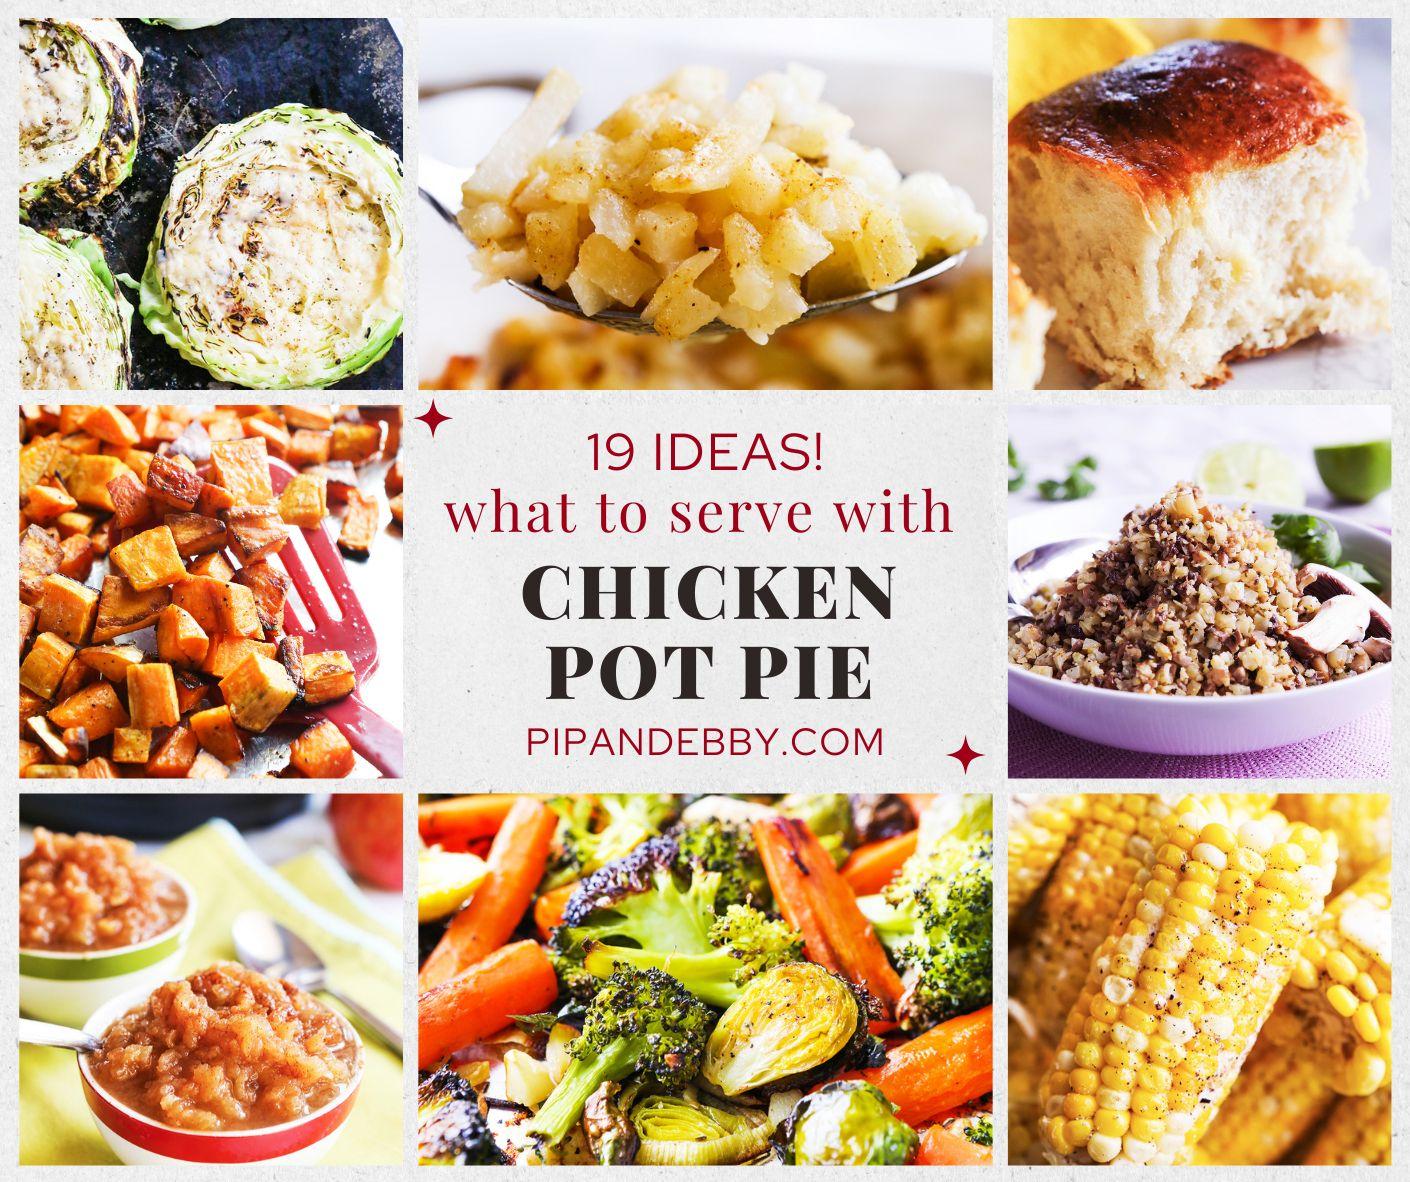 Six food photos in a grid with text overlay reading, "19 ideas! What to serve with chicken pot pie."